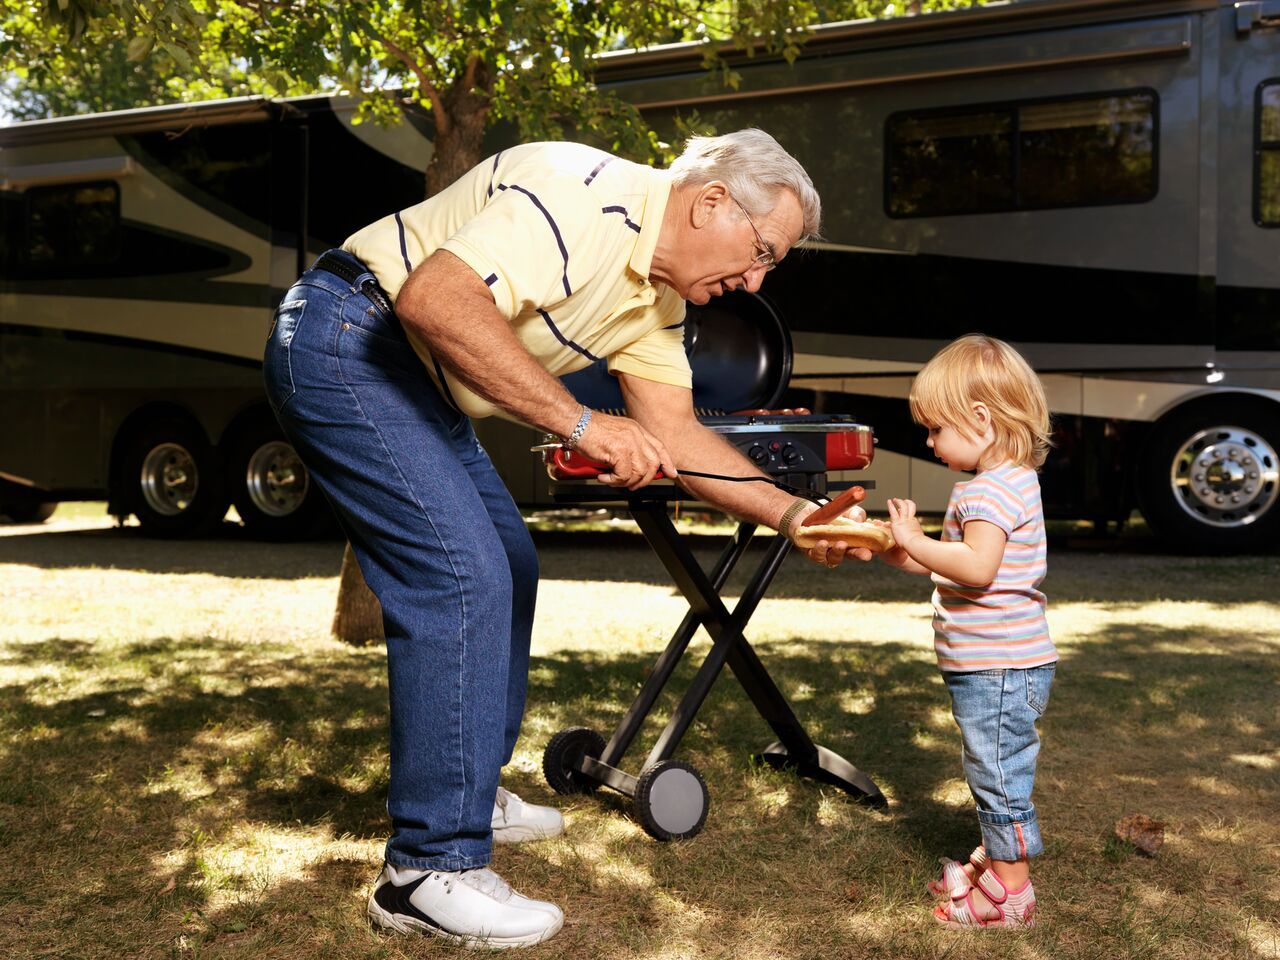 Grandpa living his ideal life while passing his Granddaughter a hotdog by the BBQ at a Campground